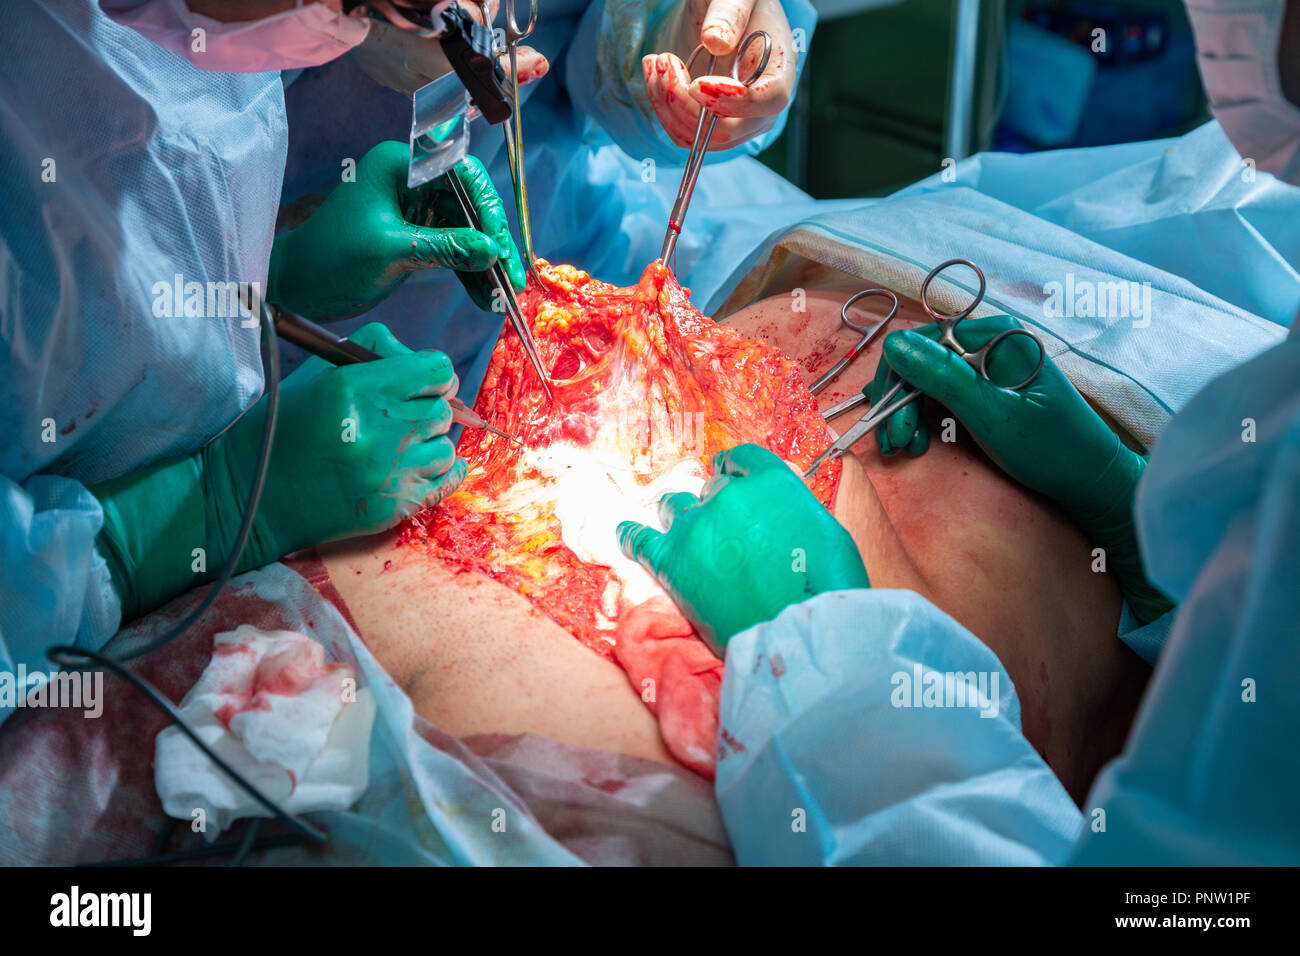 Surgical operation abdominoplasty. Close-up of the patient on the operating table, surgical removal of fat tissue from the abdomen. Stock Photo